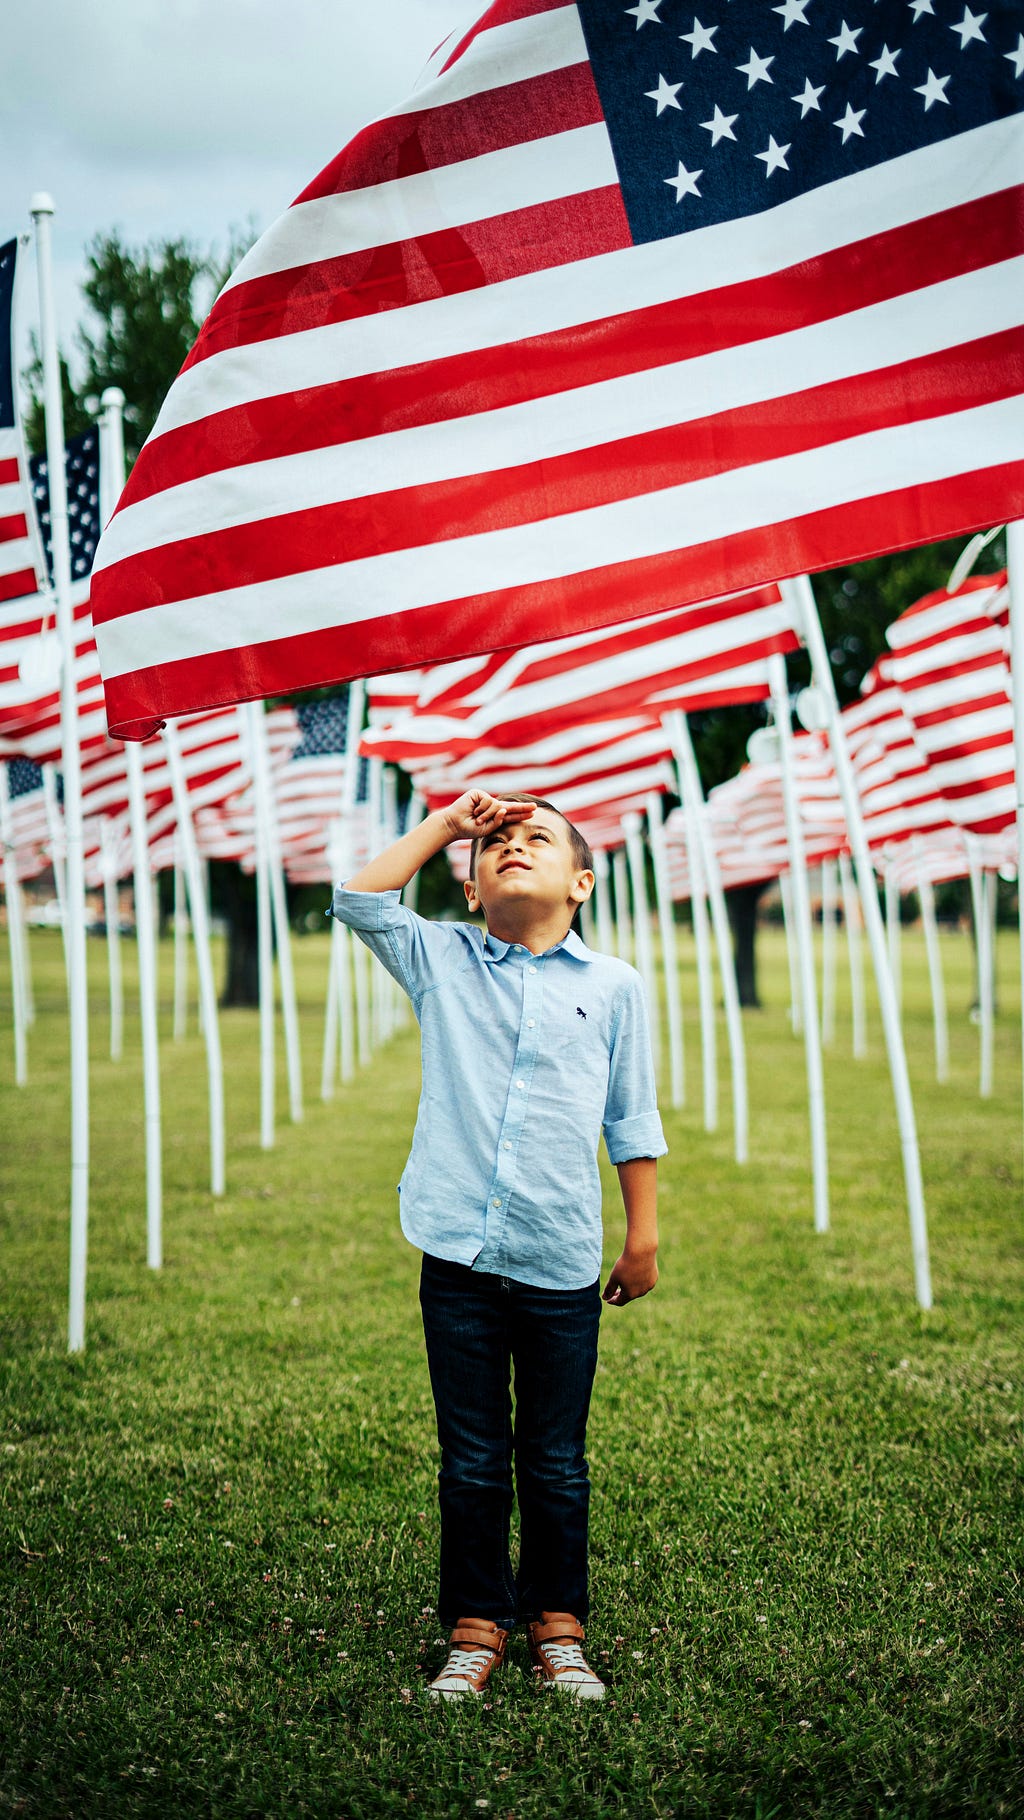 Kid saluting dozens of American flags in a field.